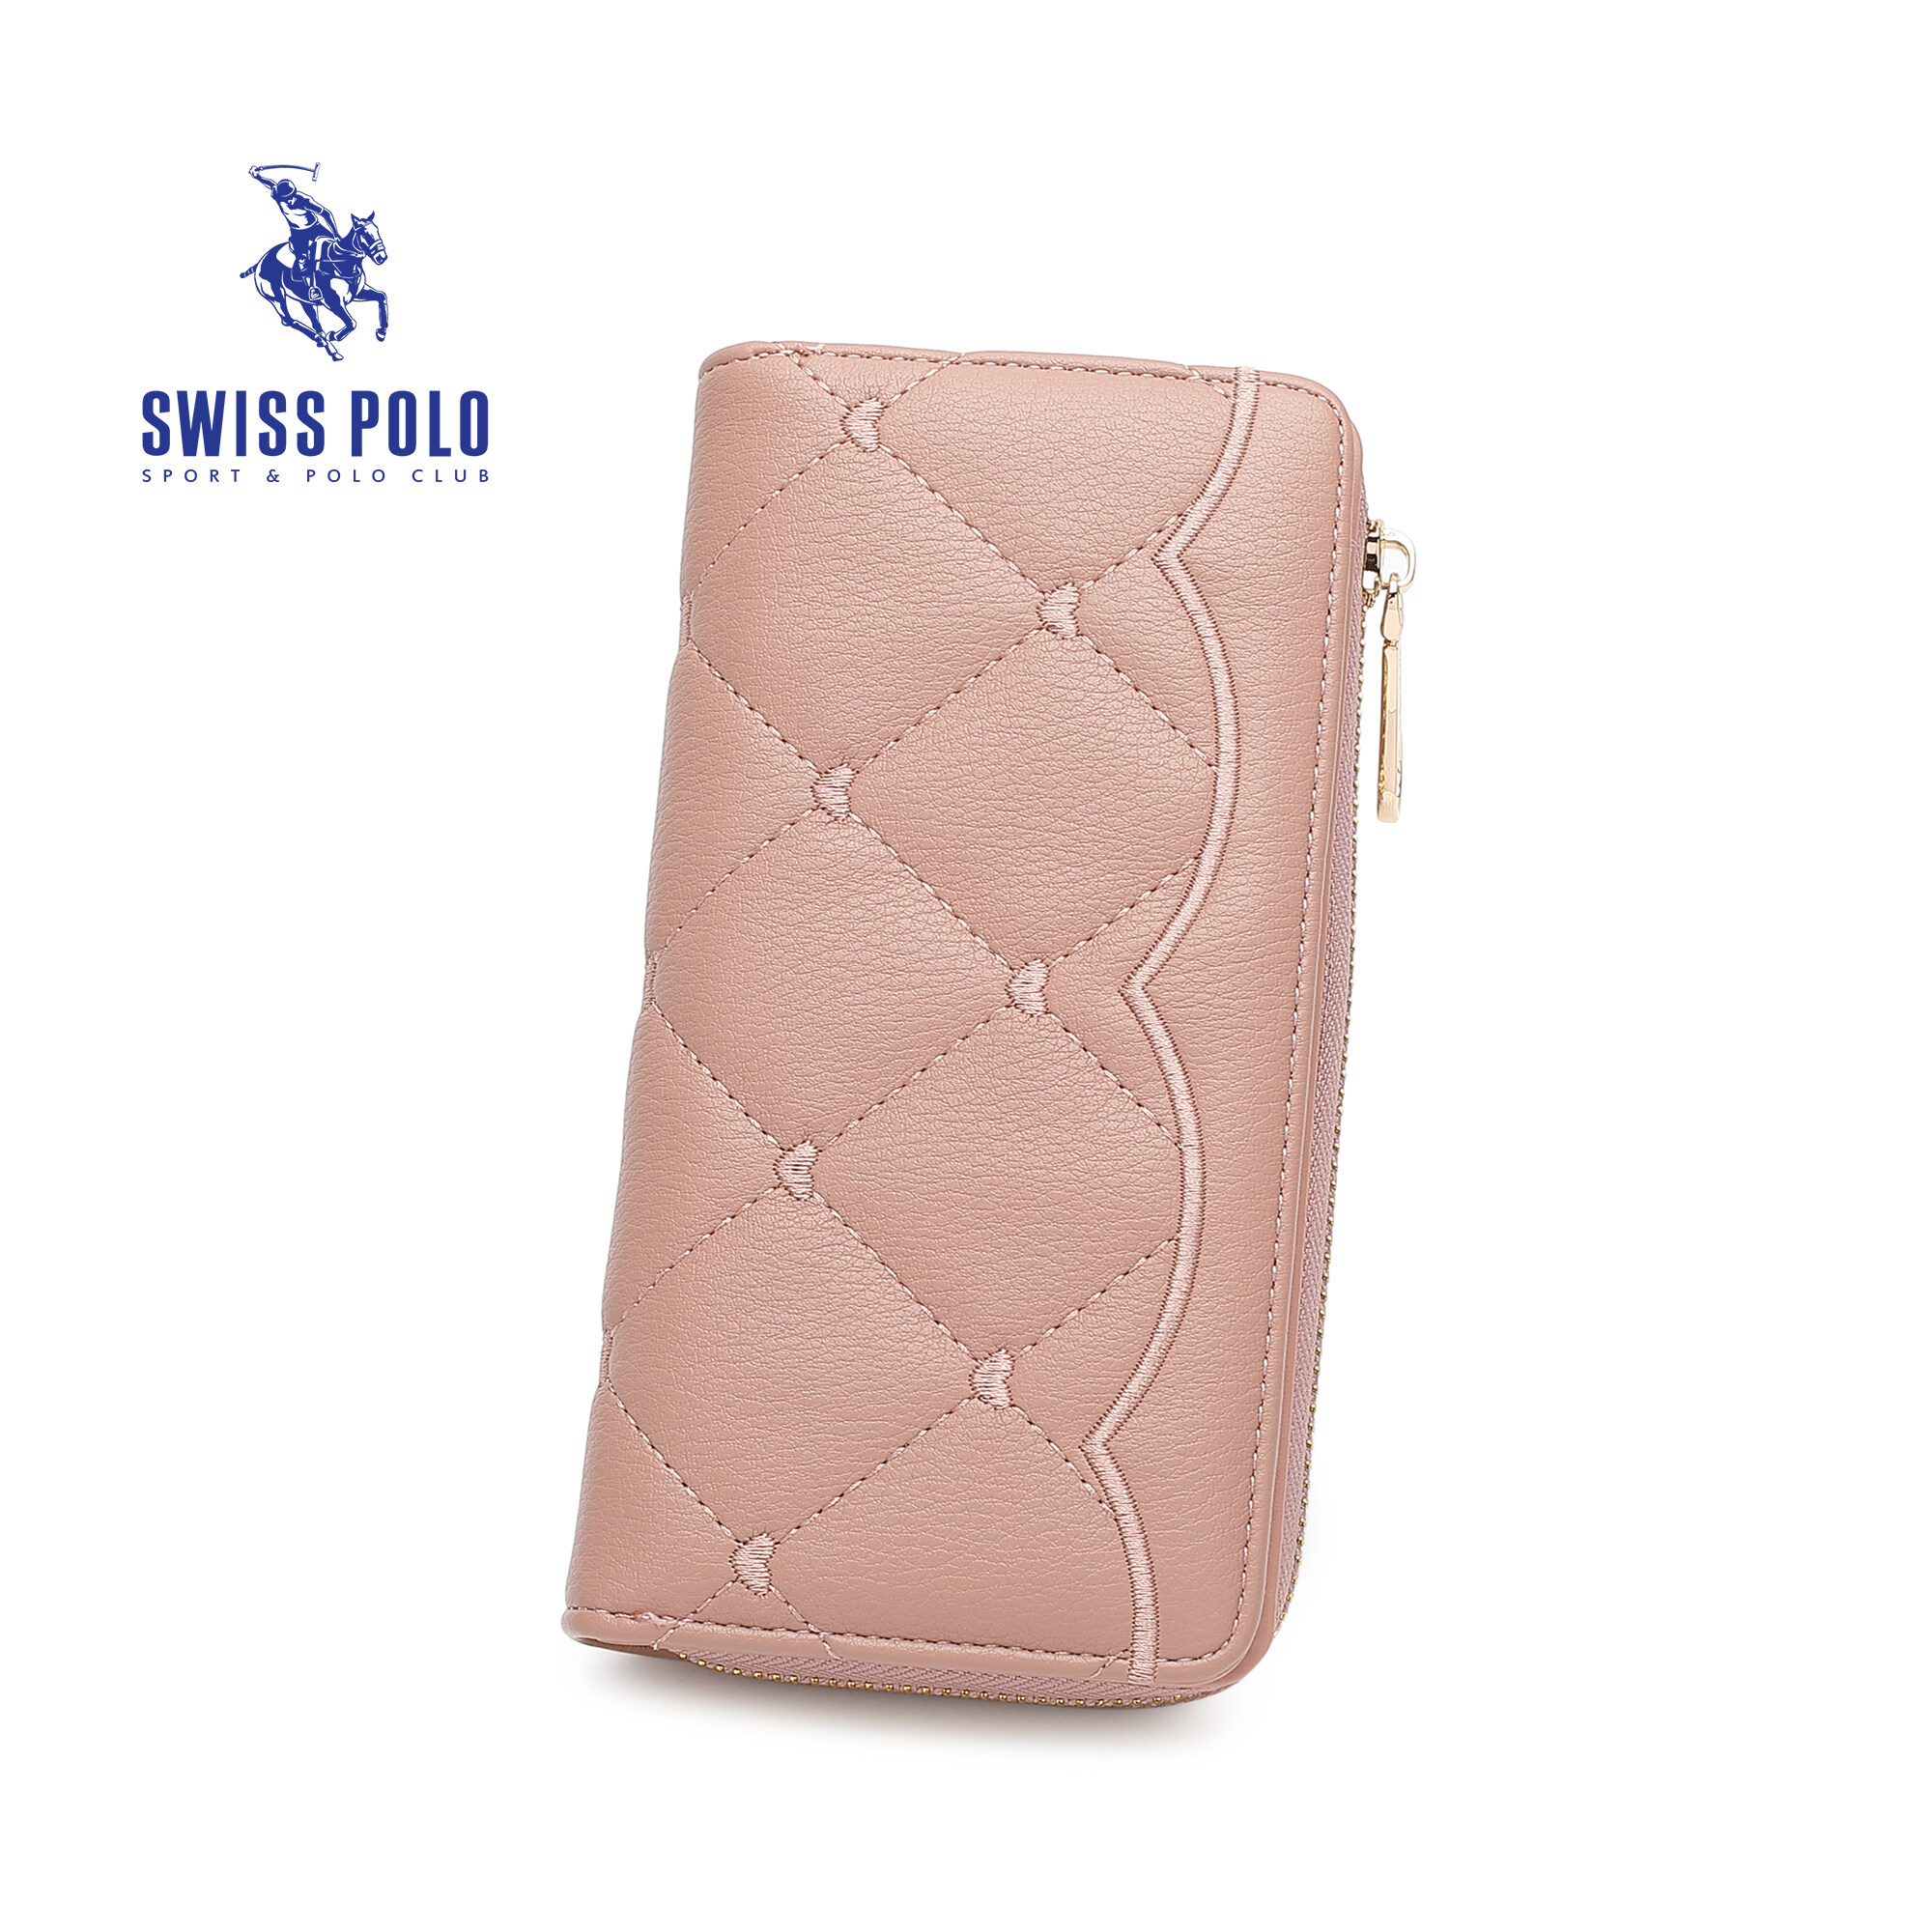 SWISS POLO Ladies Zipper Quilted Long Purse SLP 48-4 PINK